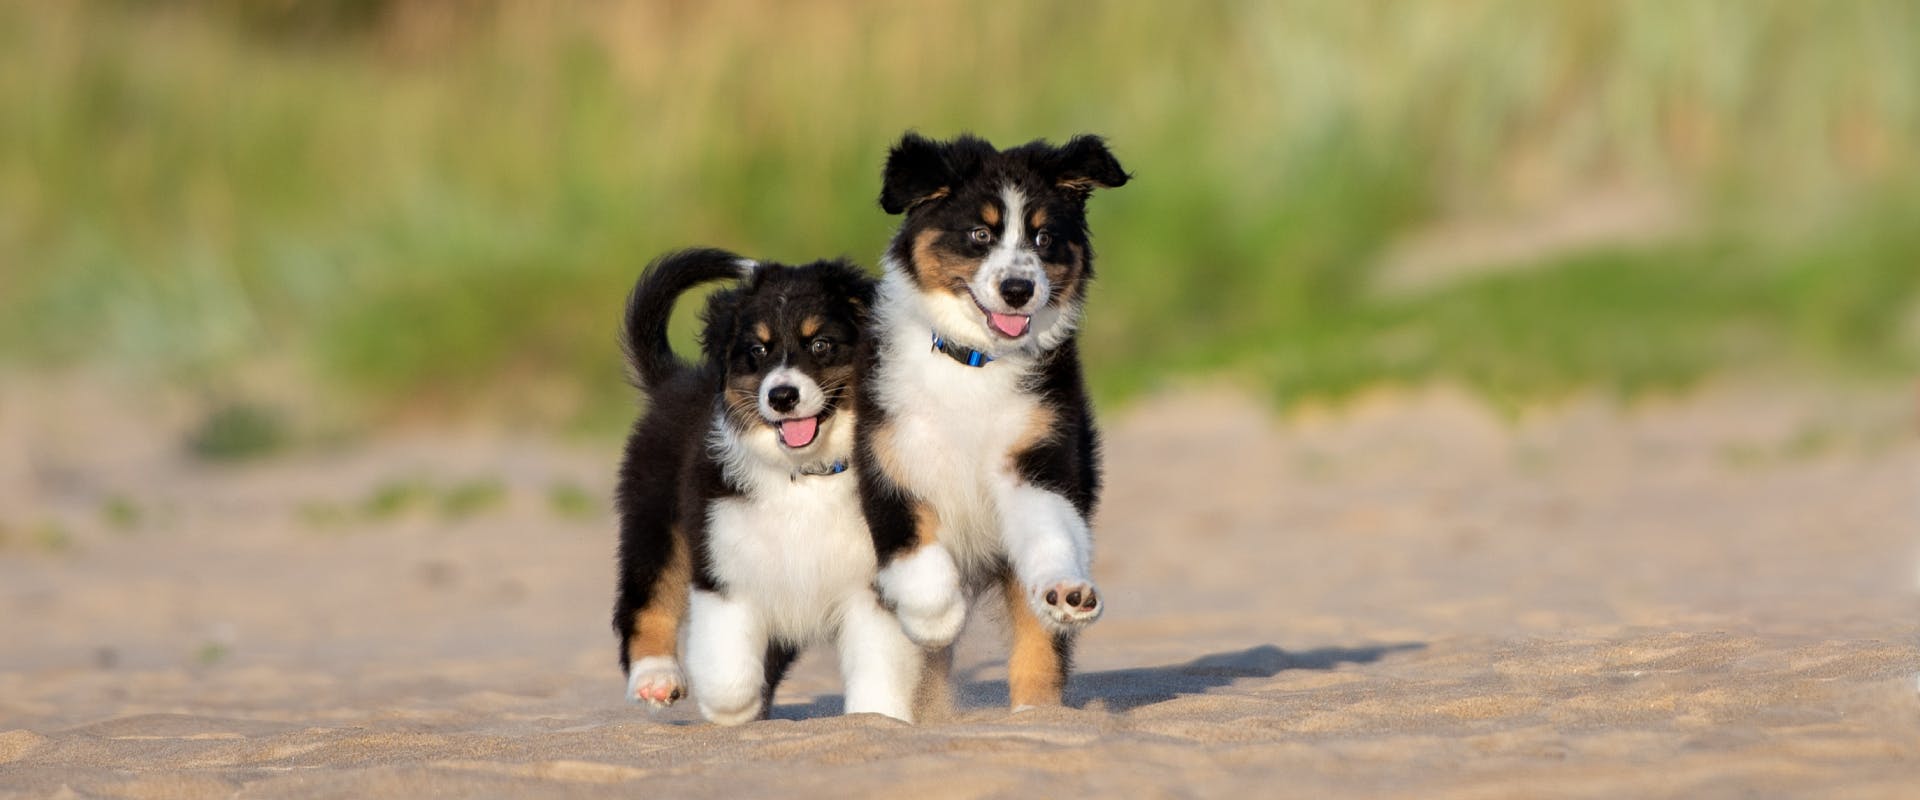 two Bernese mountain dog puppies running along a beach together